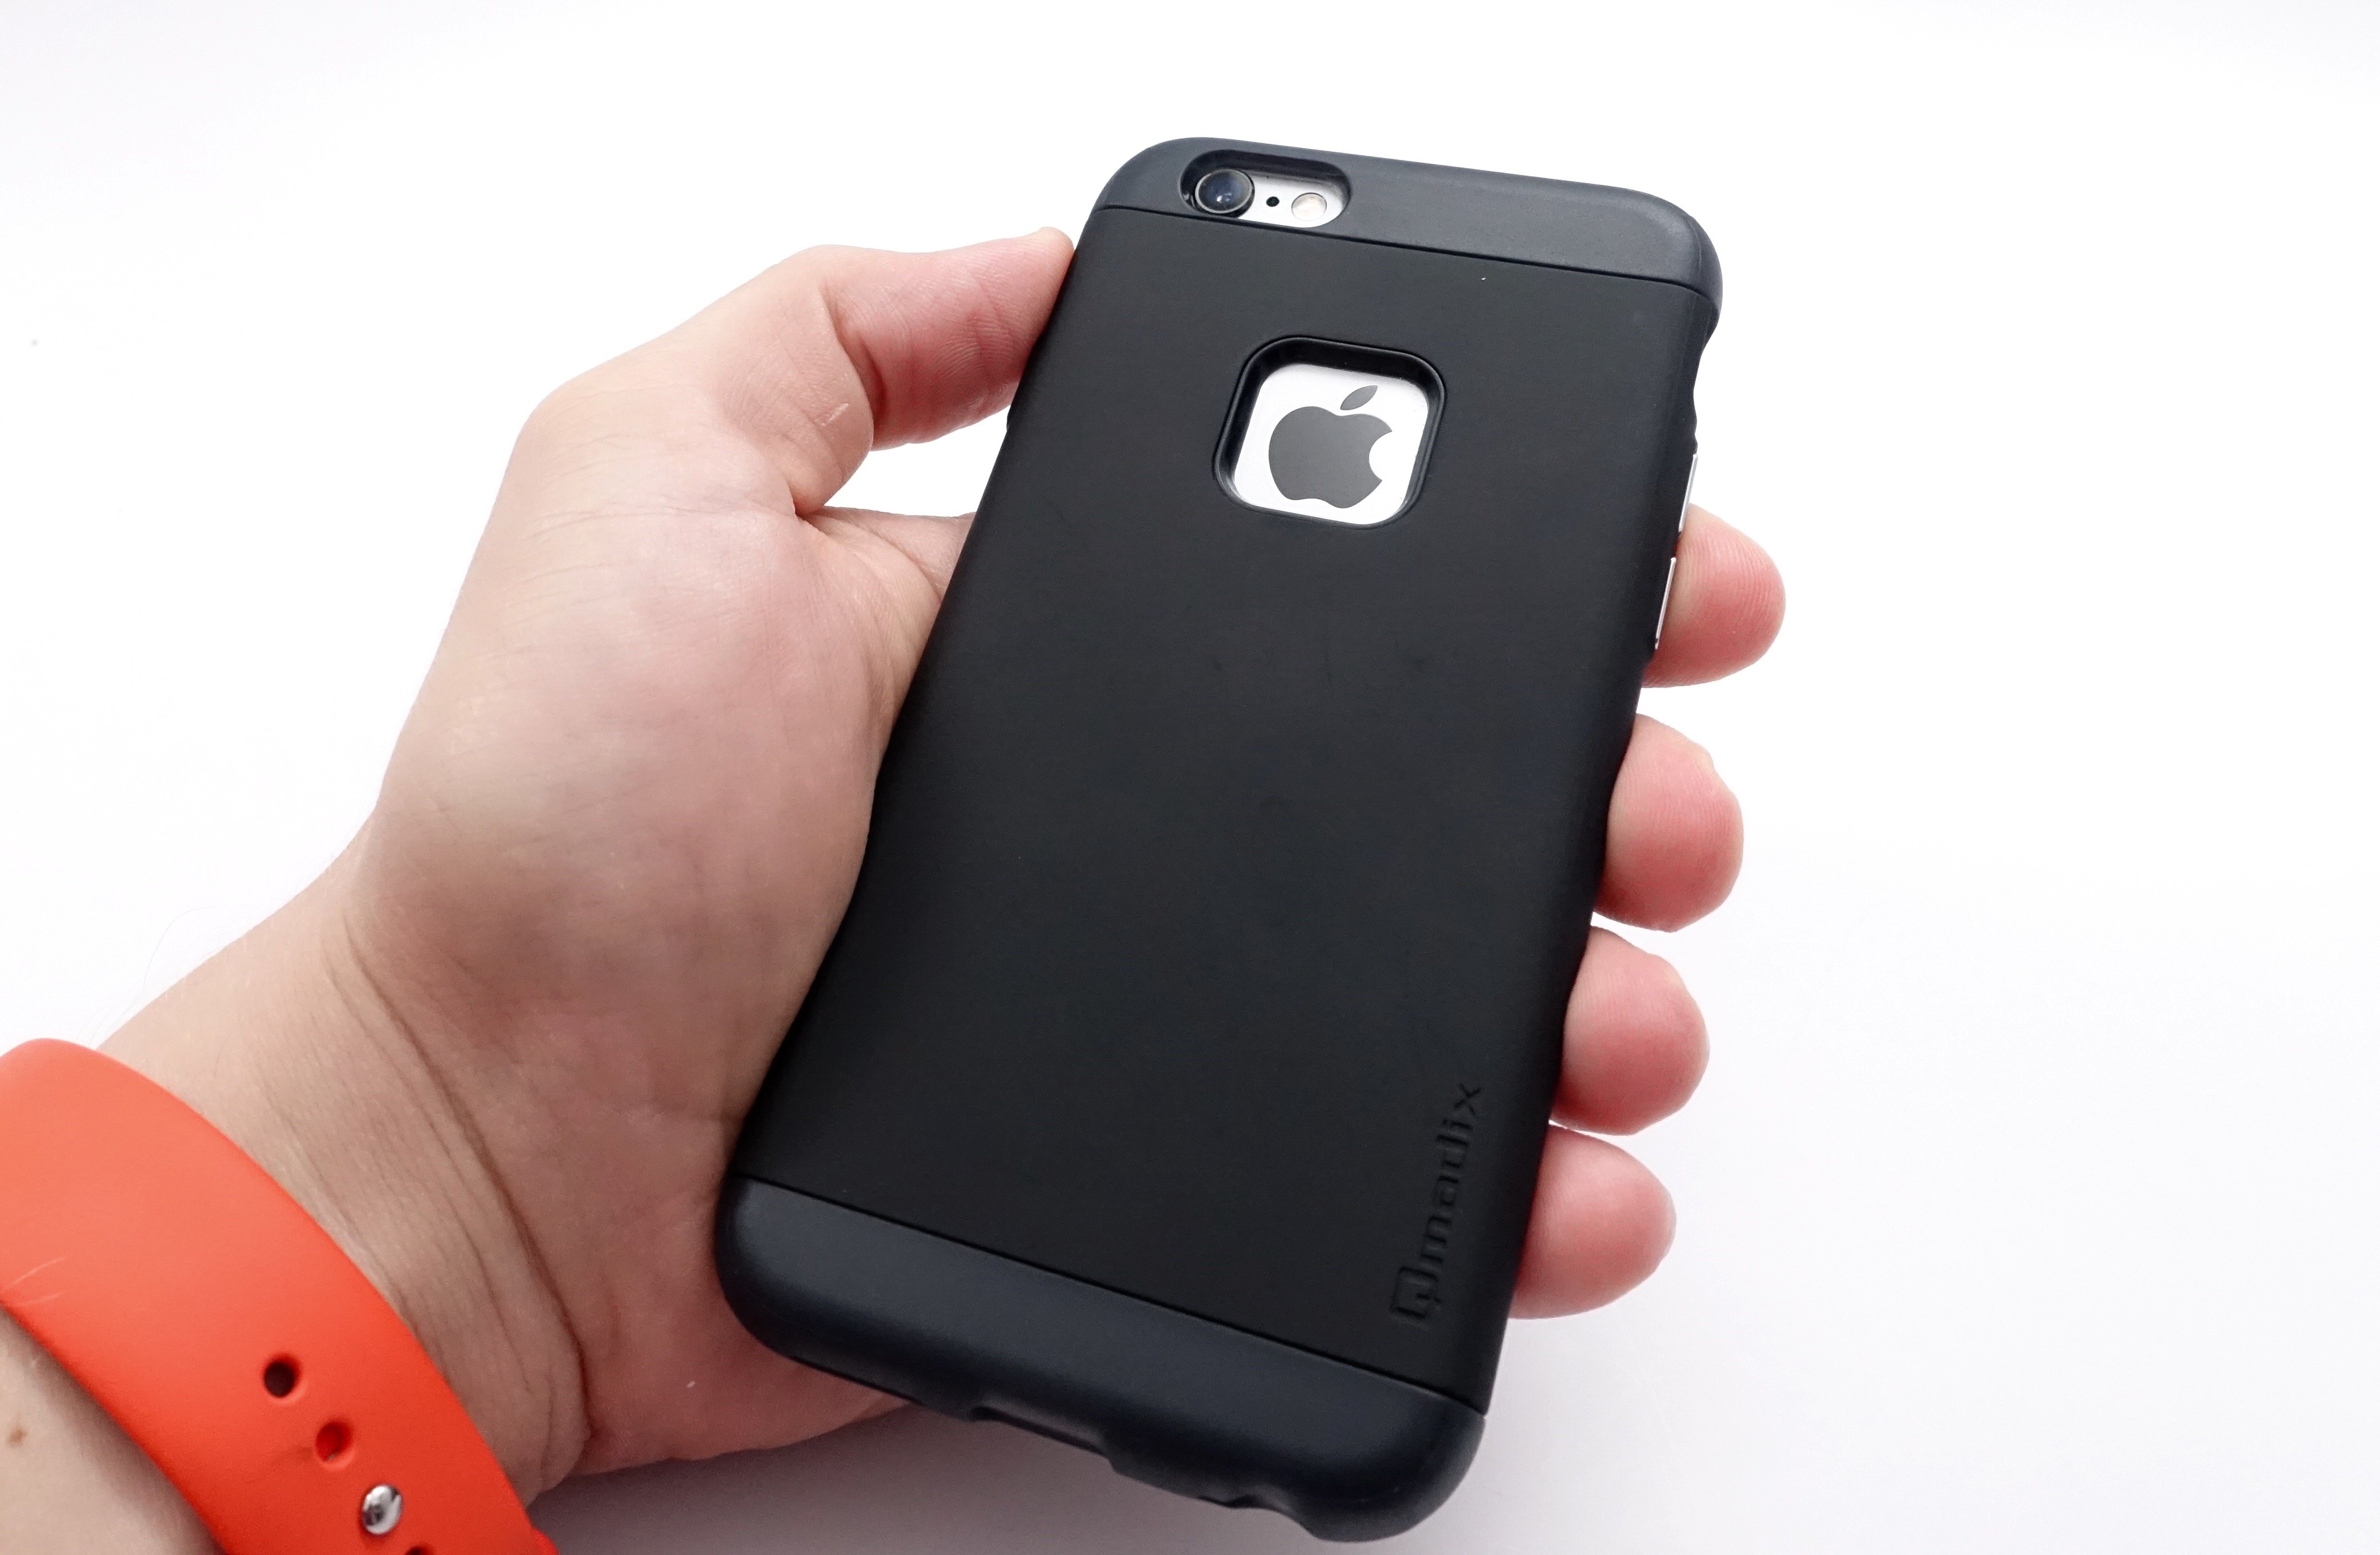 The Qmadix X Series Lite iPhone 6s case is a great way to protect your iPhone.